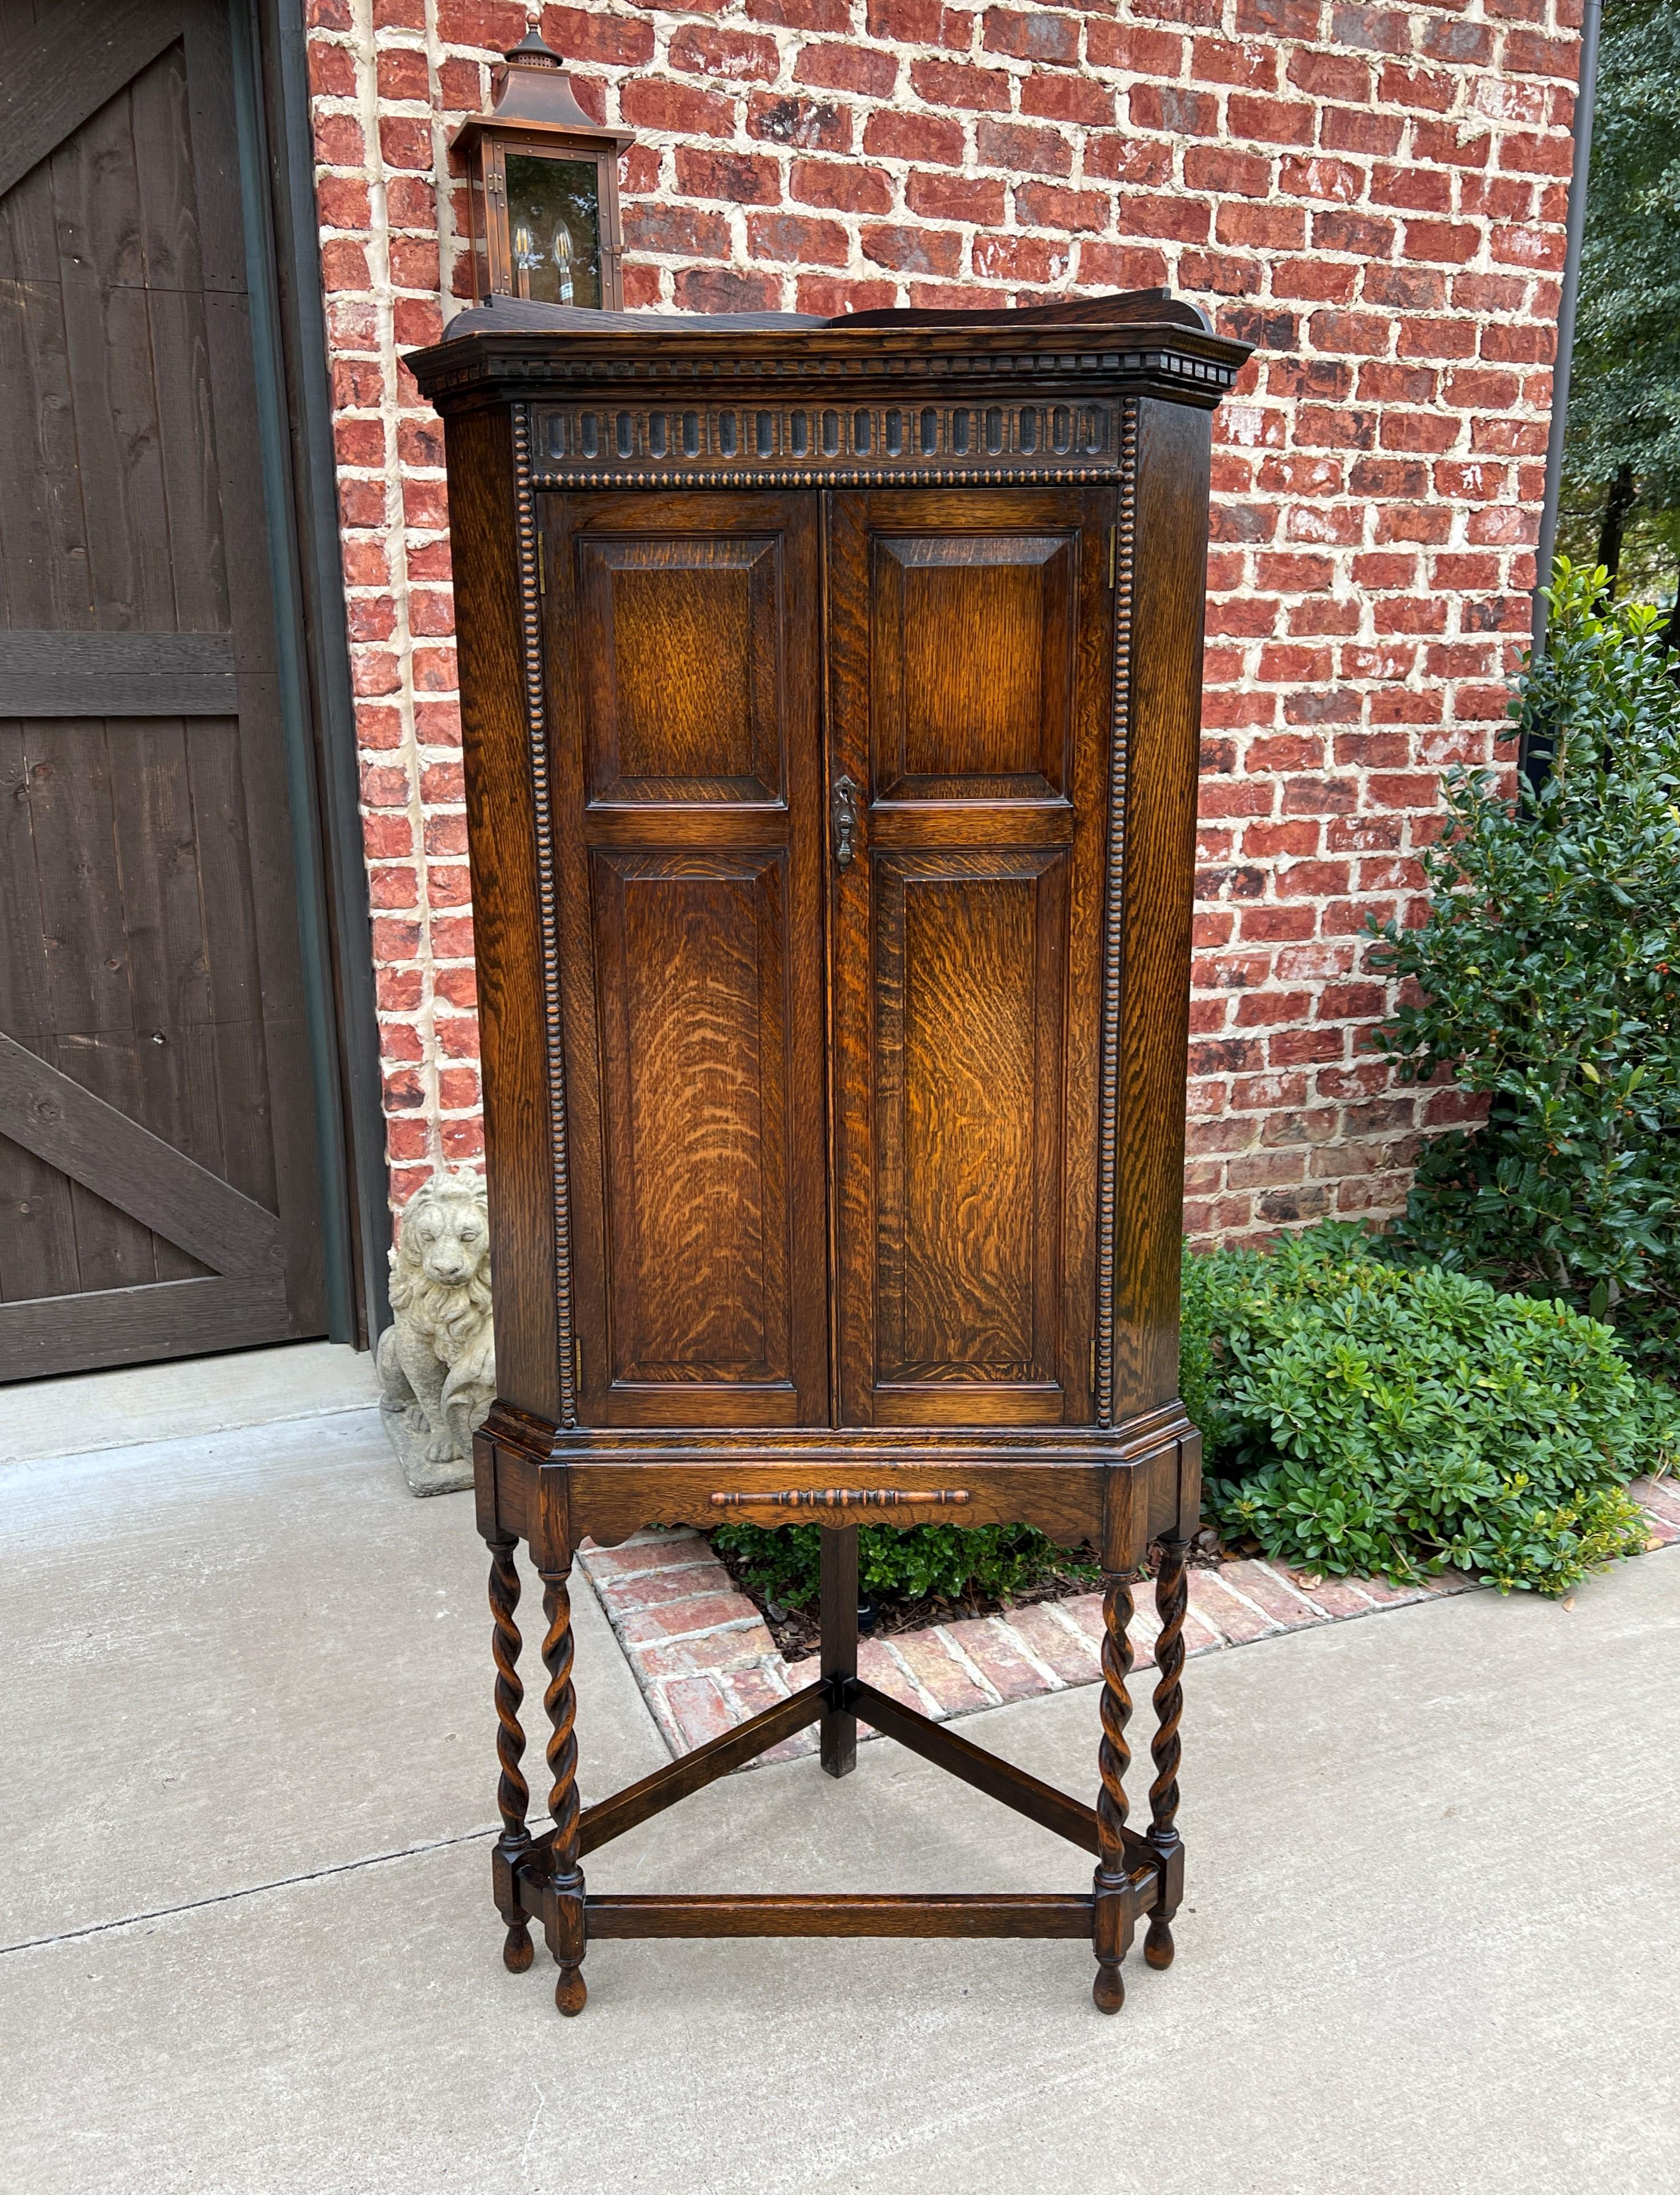 Beautifully carved antique English tiger oak Jacobean style corner cabinet, medicine or spice cabinet with interior shelves and key~~double barley twist legs~~c. 1920s

Full of classic English charm~~beautifully carved tiger oak CORNER cabinet